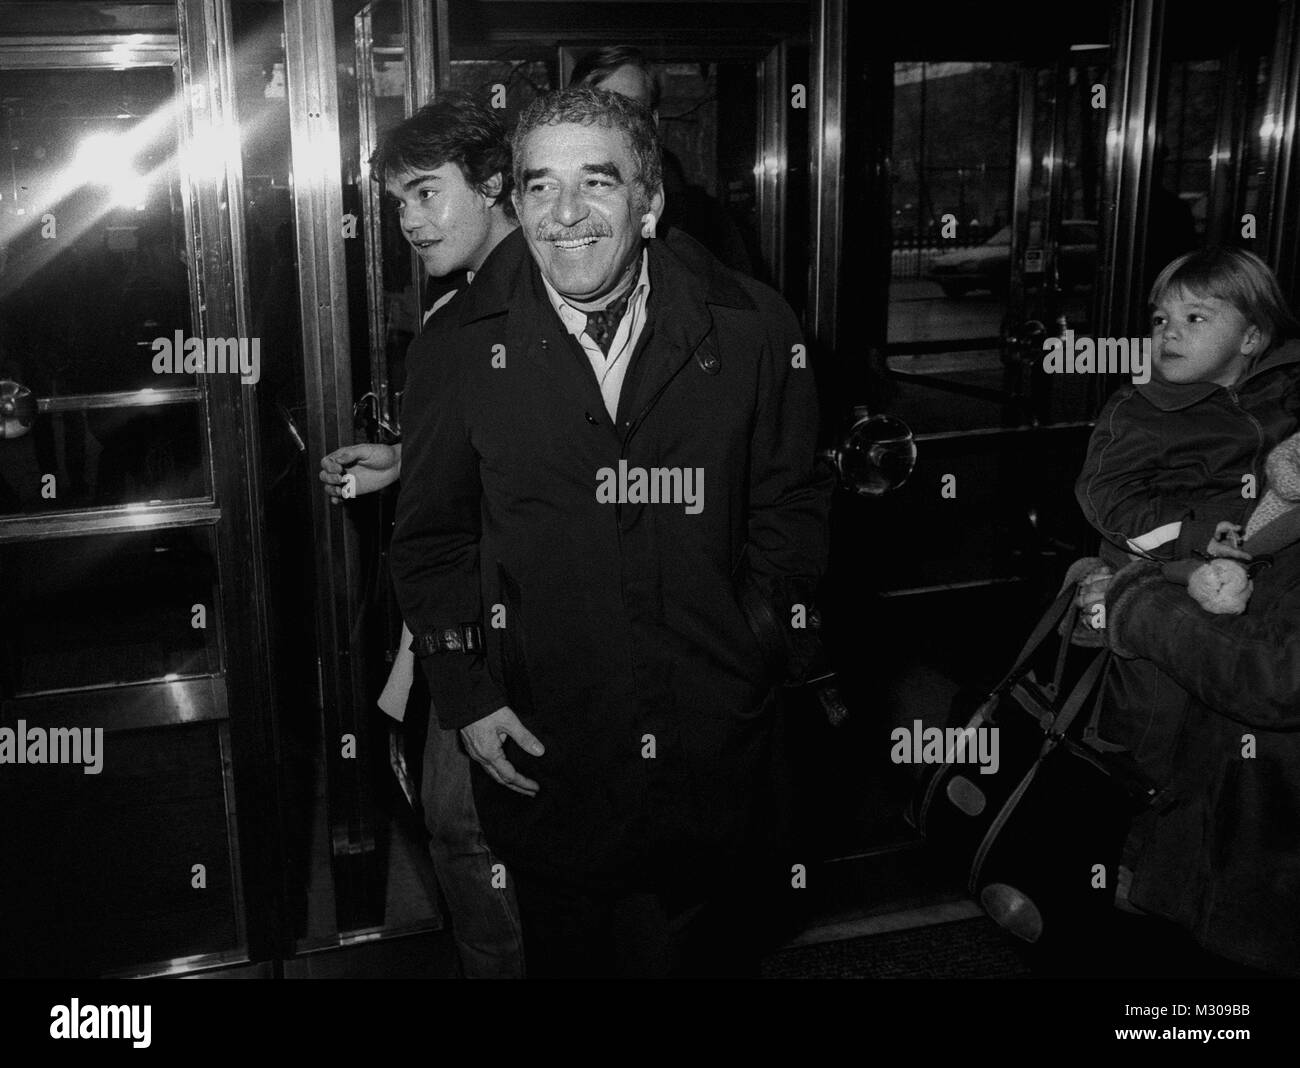 GABRIEL GARCIA MARQUEZ Nobel prize winner arriving to The Stockholm City Theater for a Nobel event 1982 Stock Photo